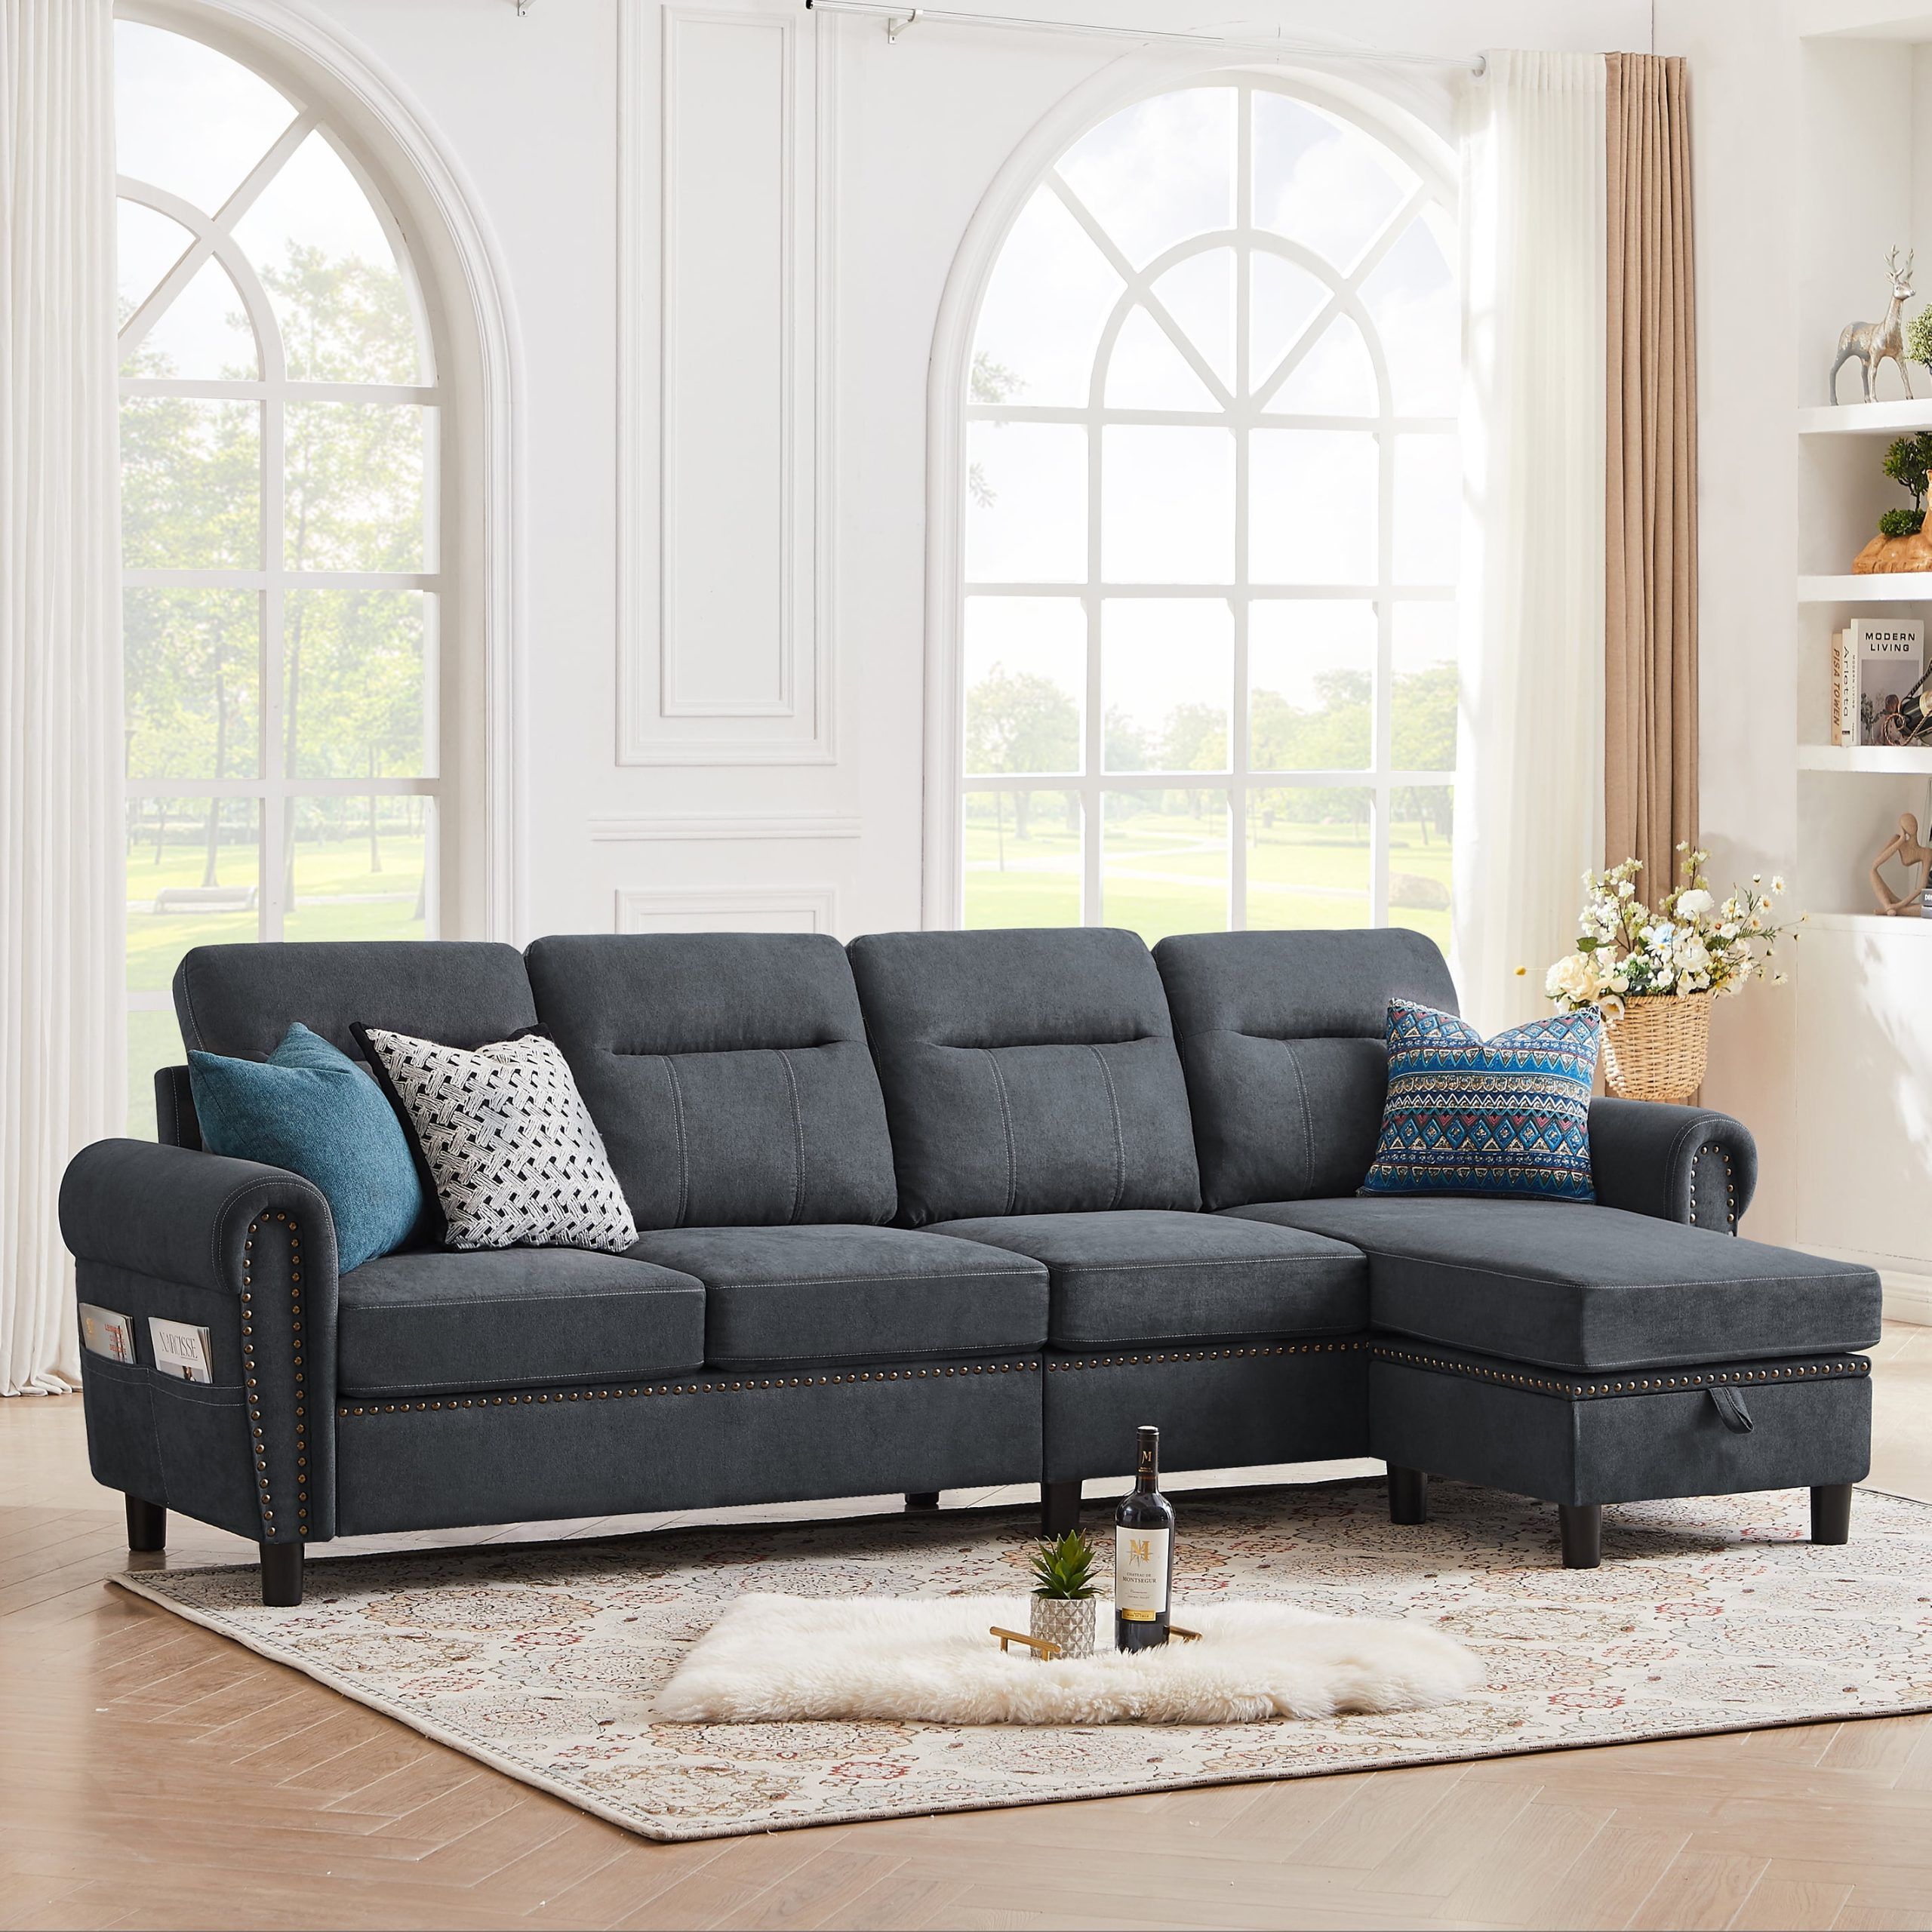 Jarenie Modern Sectional Sofa Couch With Reversible Chaise L Shaped Couch  4 Seat Convertible Sofa For Living Room ,sectional Couch ,living Room  ,darkgrey – Walmart In L Shape Couches With Reversible Chaises (View 5 of 15)